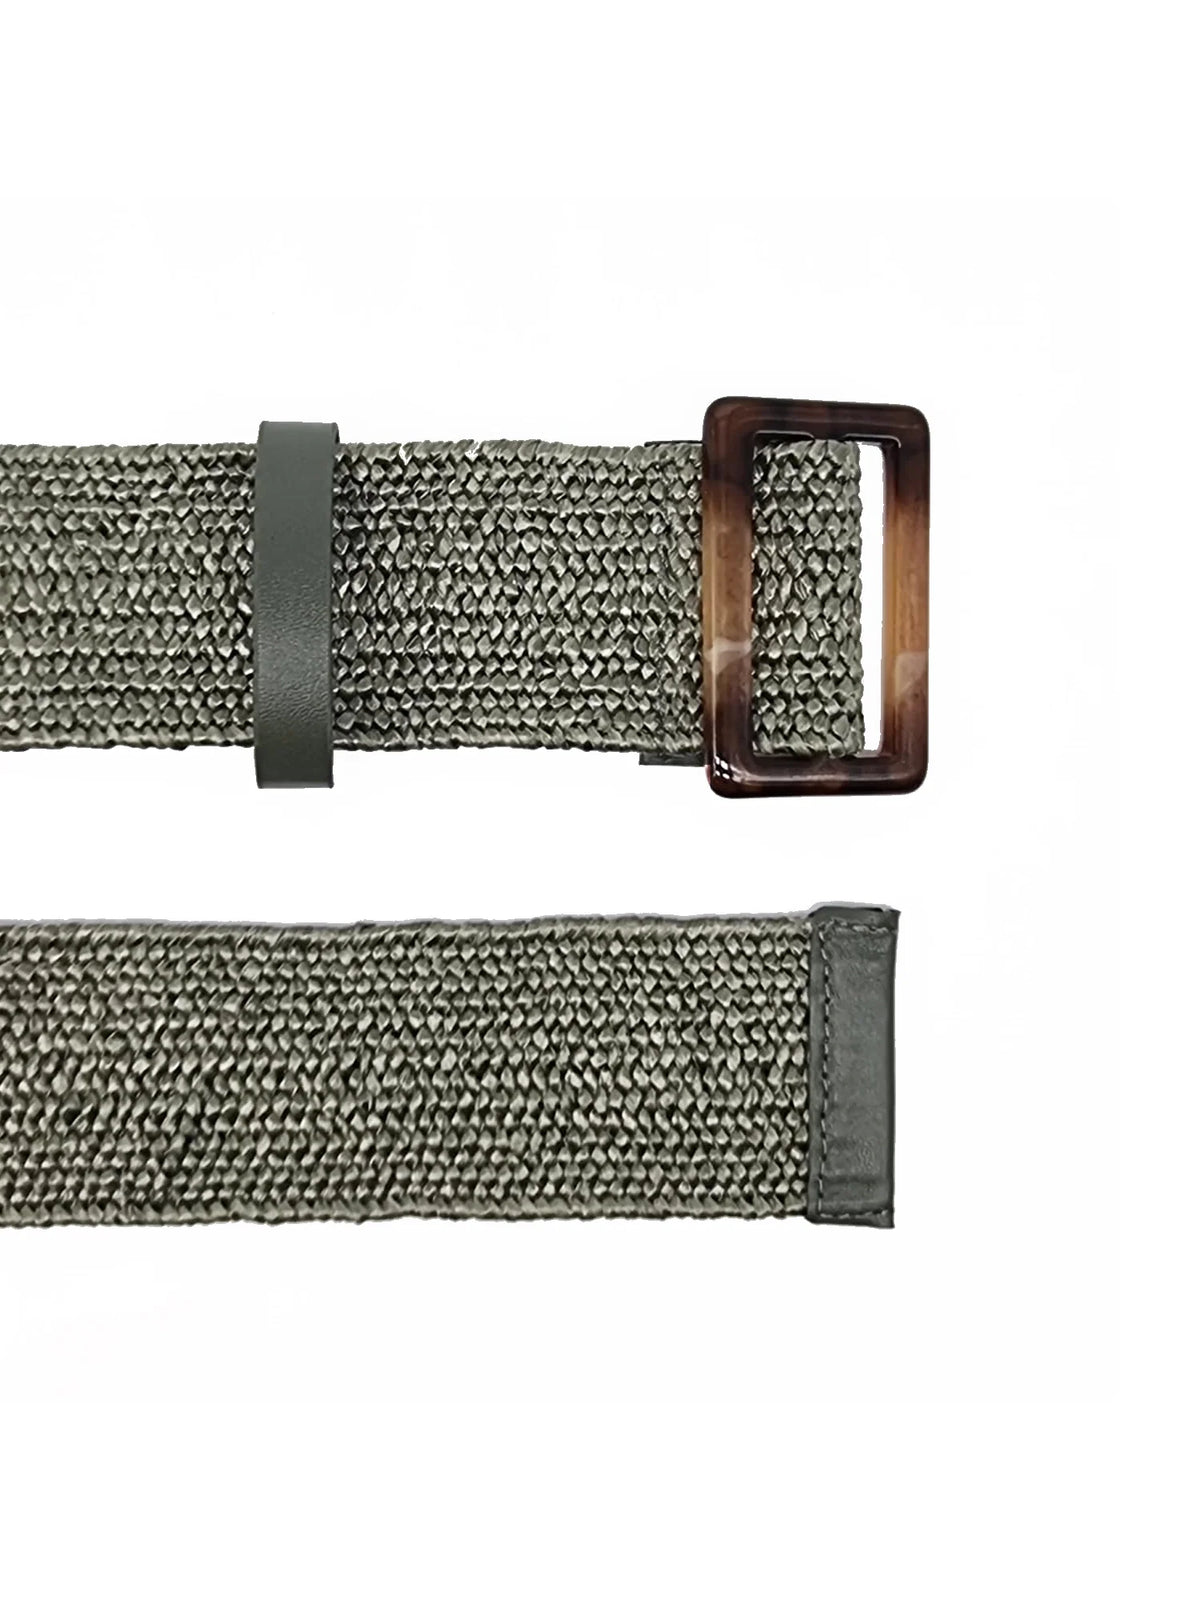 Stretch belt in Khaki with a square buckle